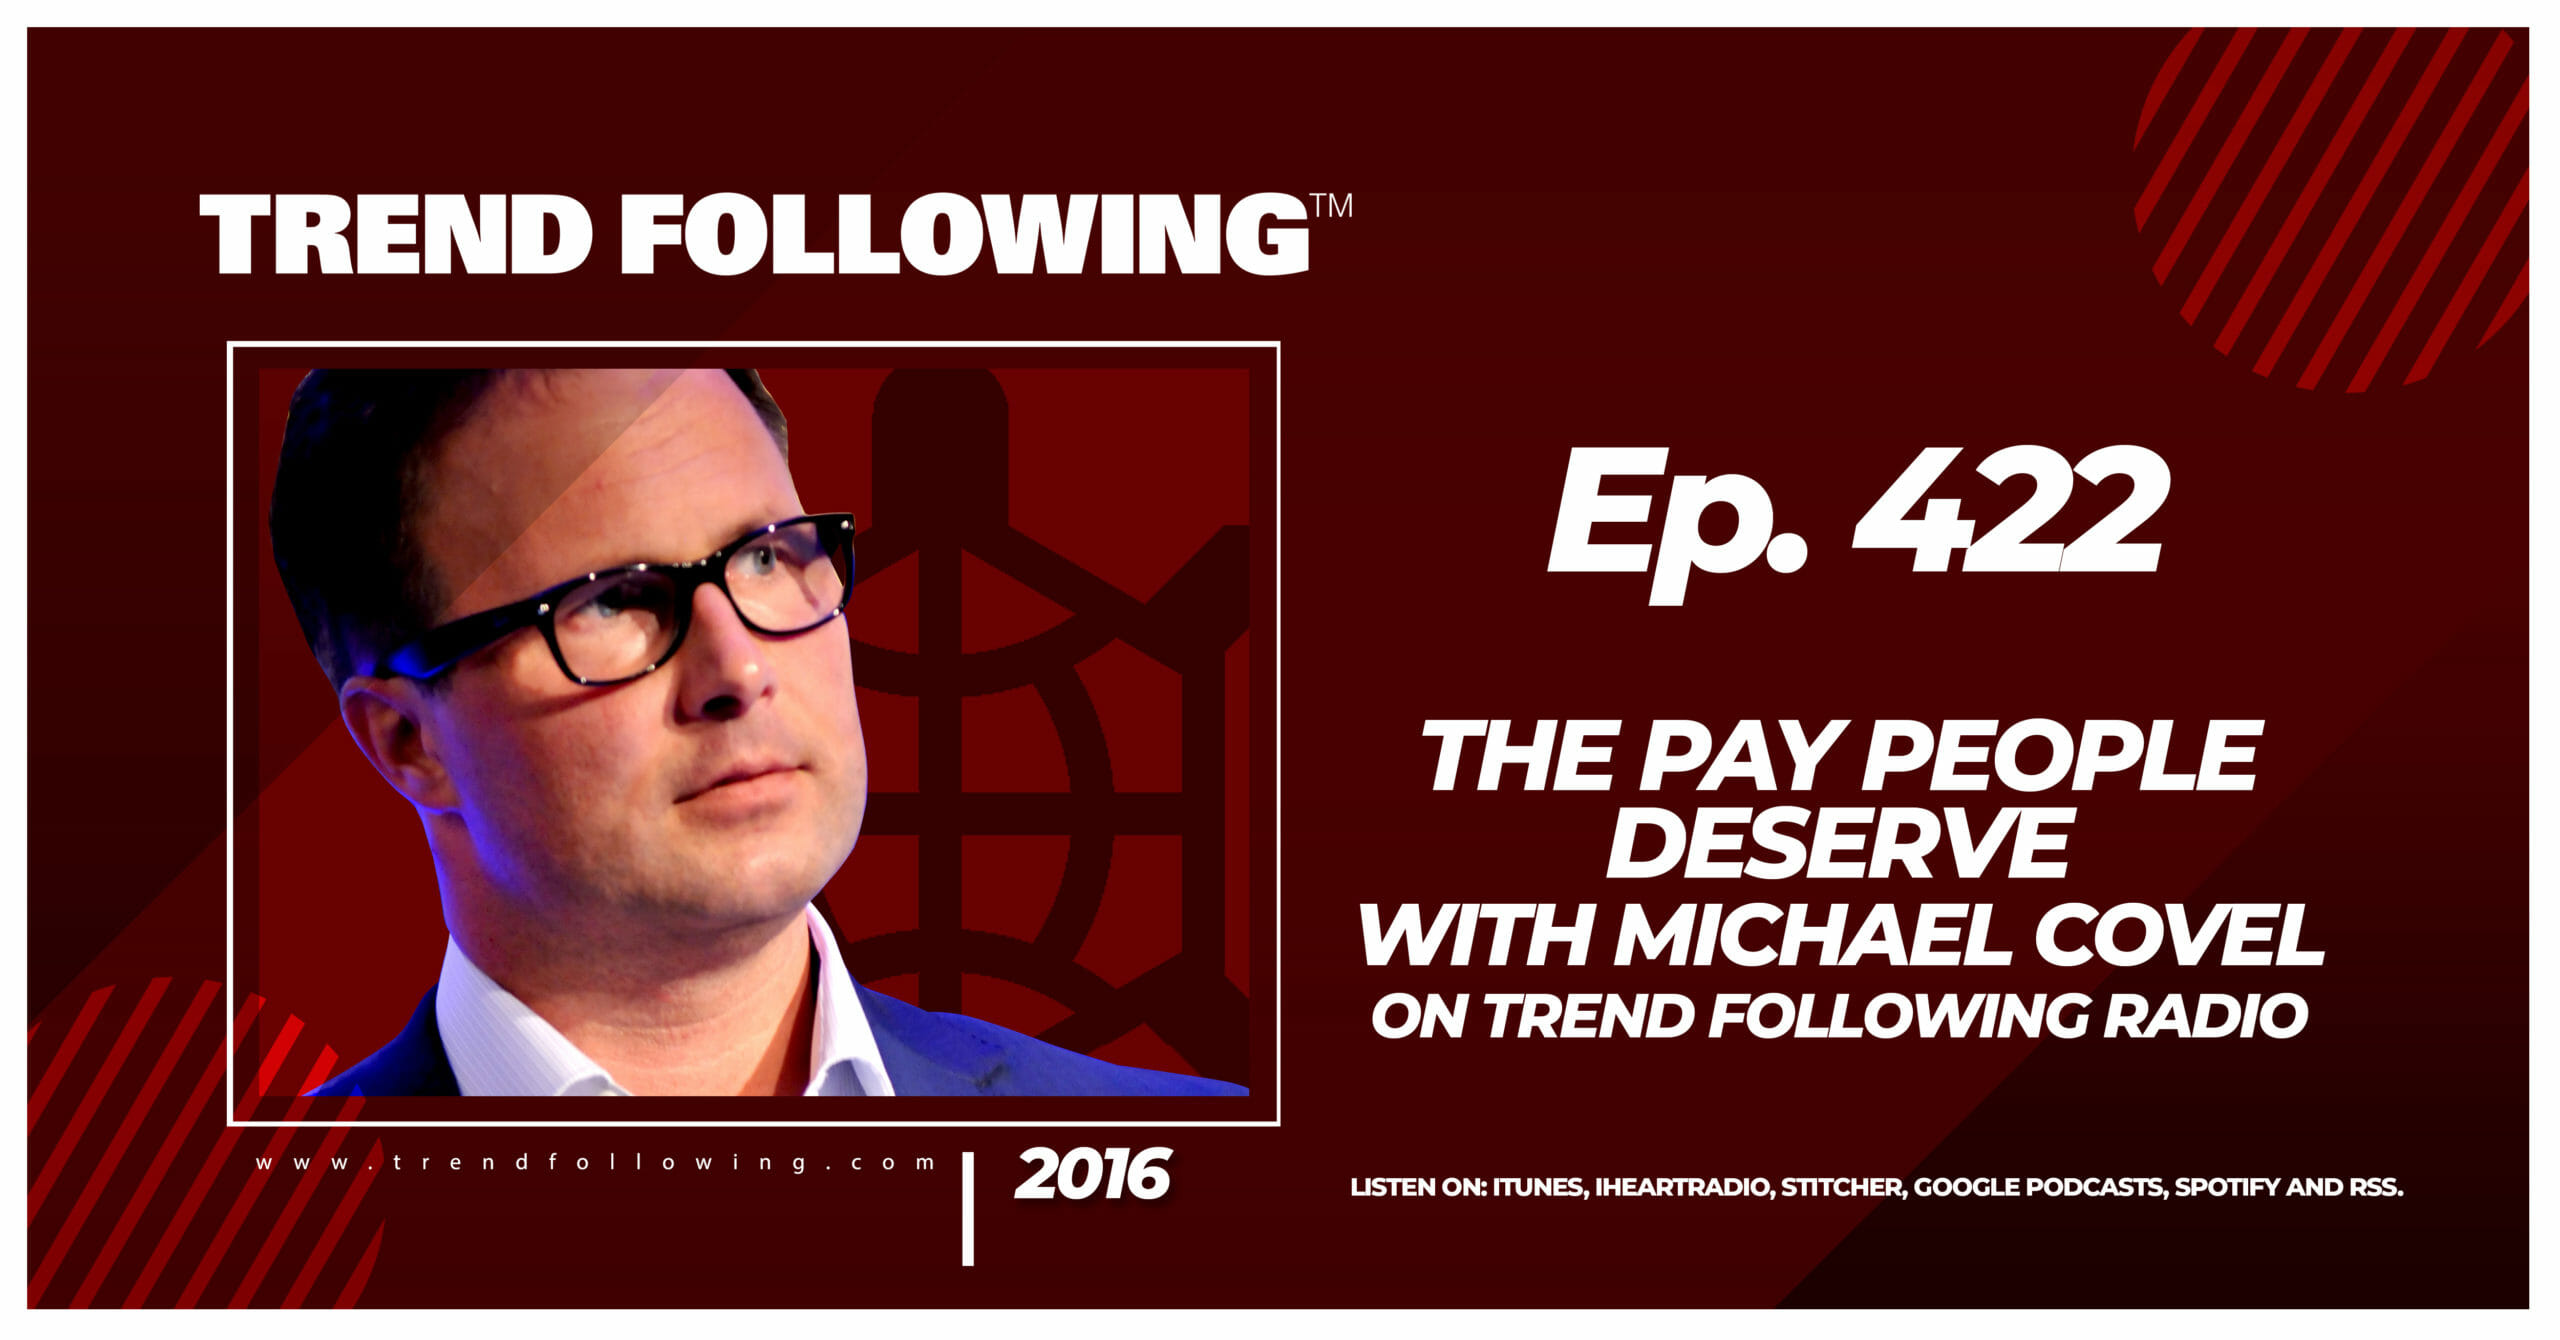 The Pay People Deserve with Michael Covel on Trend Following Radio